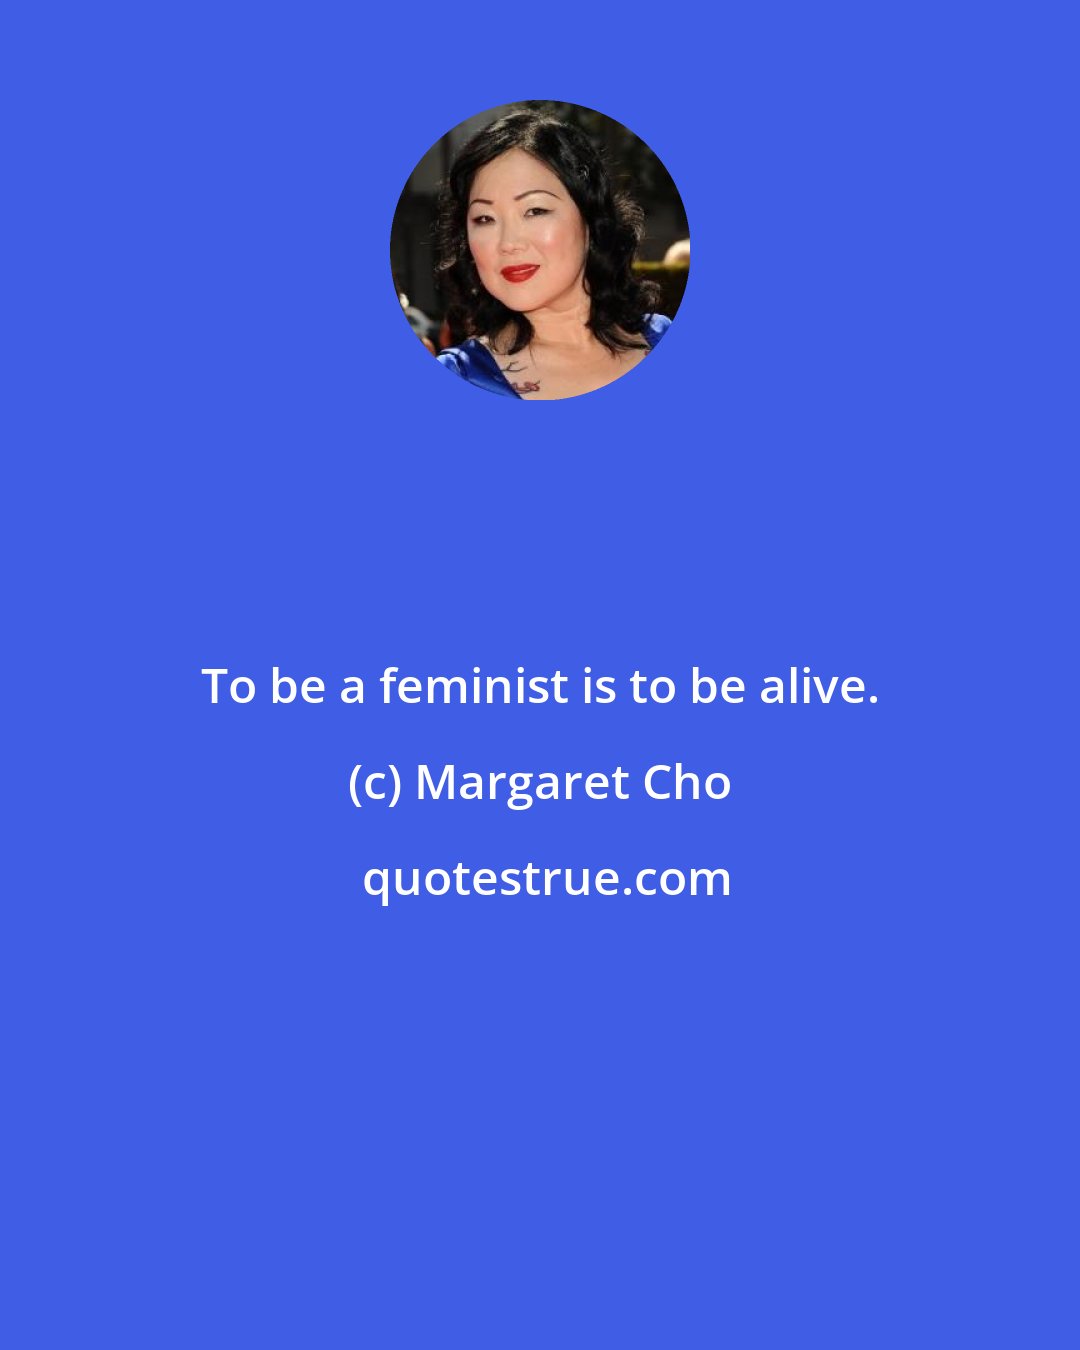 Margaret Cho: To be a feminist is to be alive.